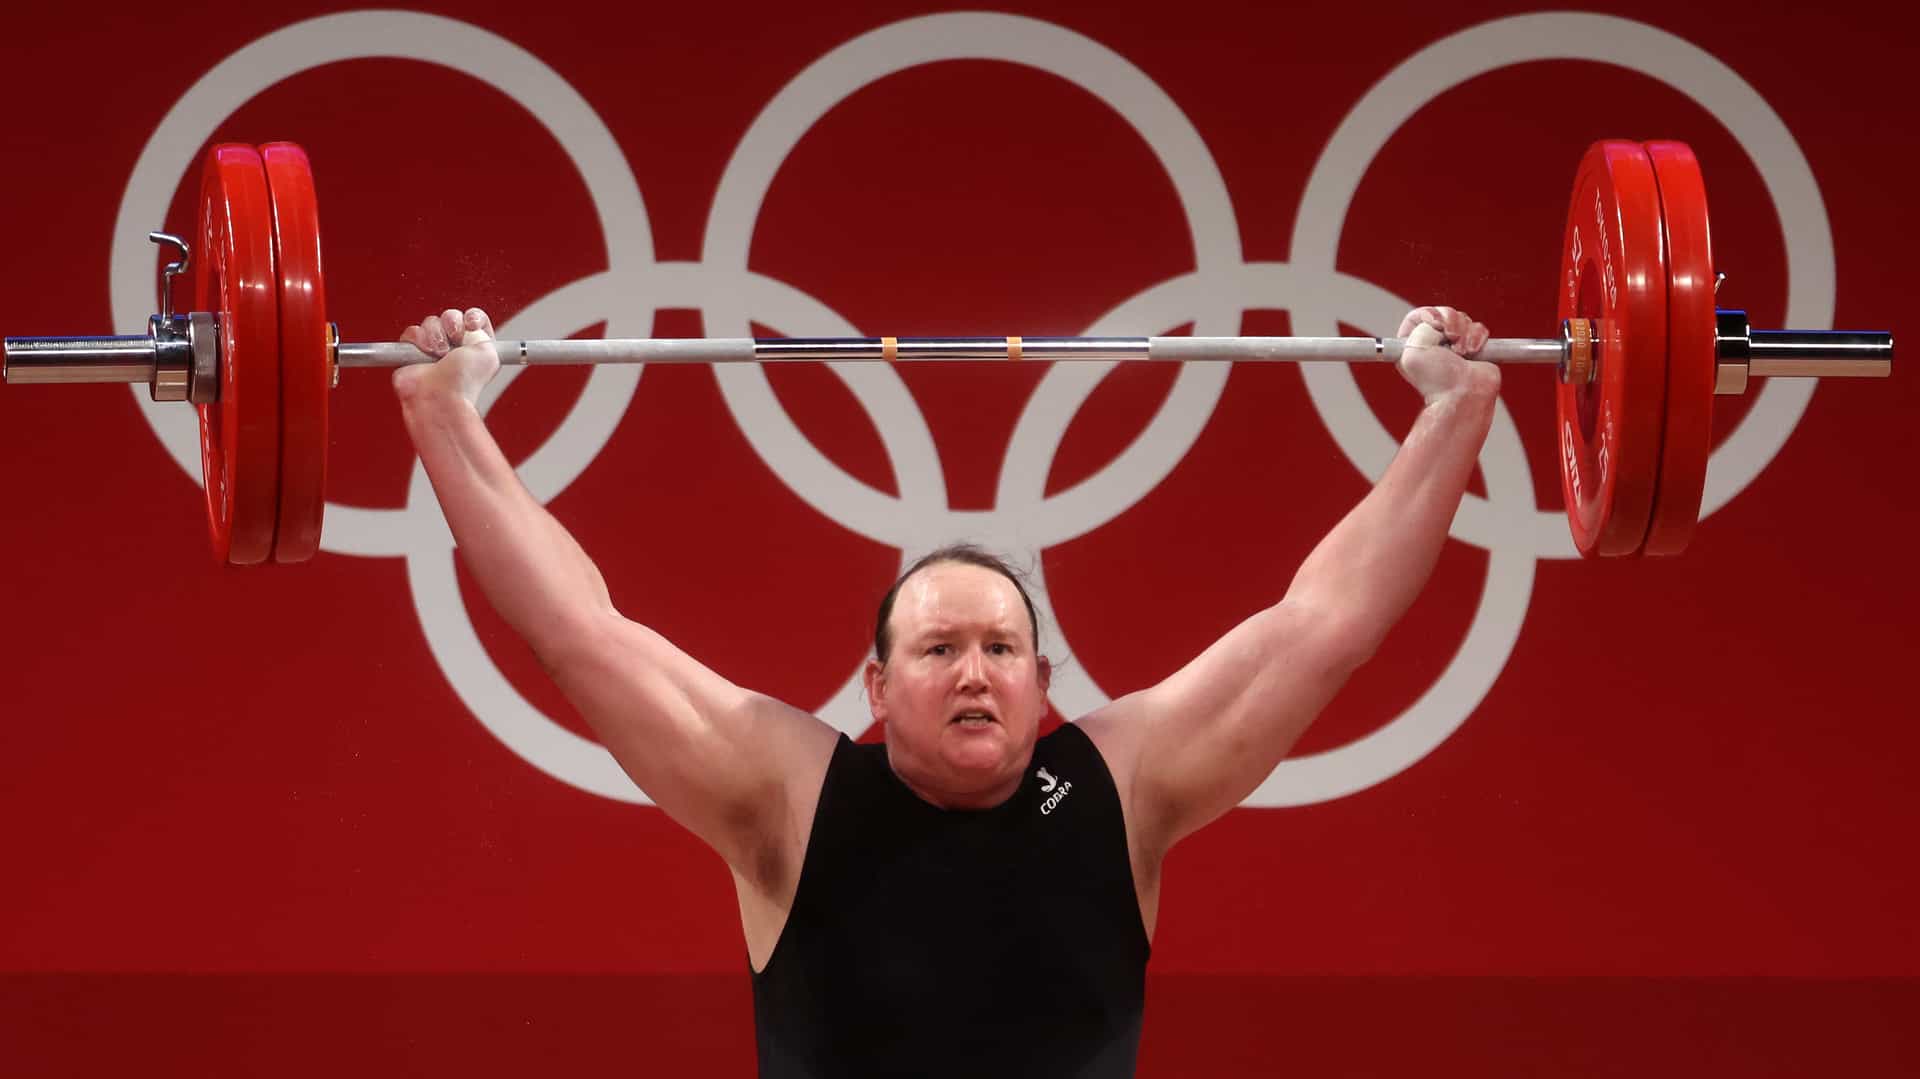 Transgender Weightlifter Hubbard: ‘People Like Me Are Just People'